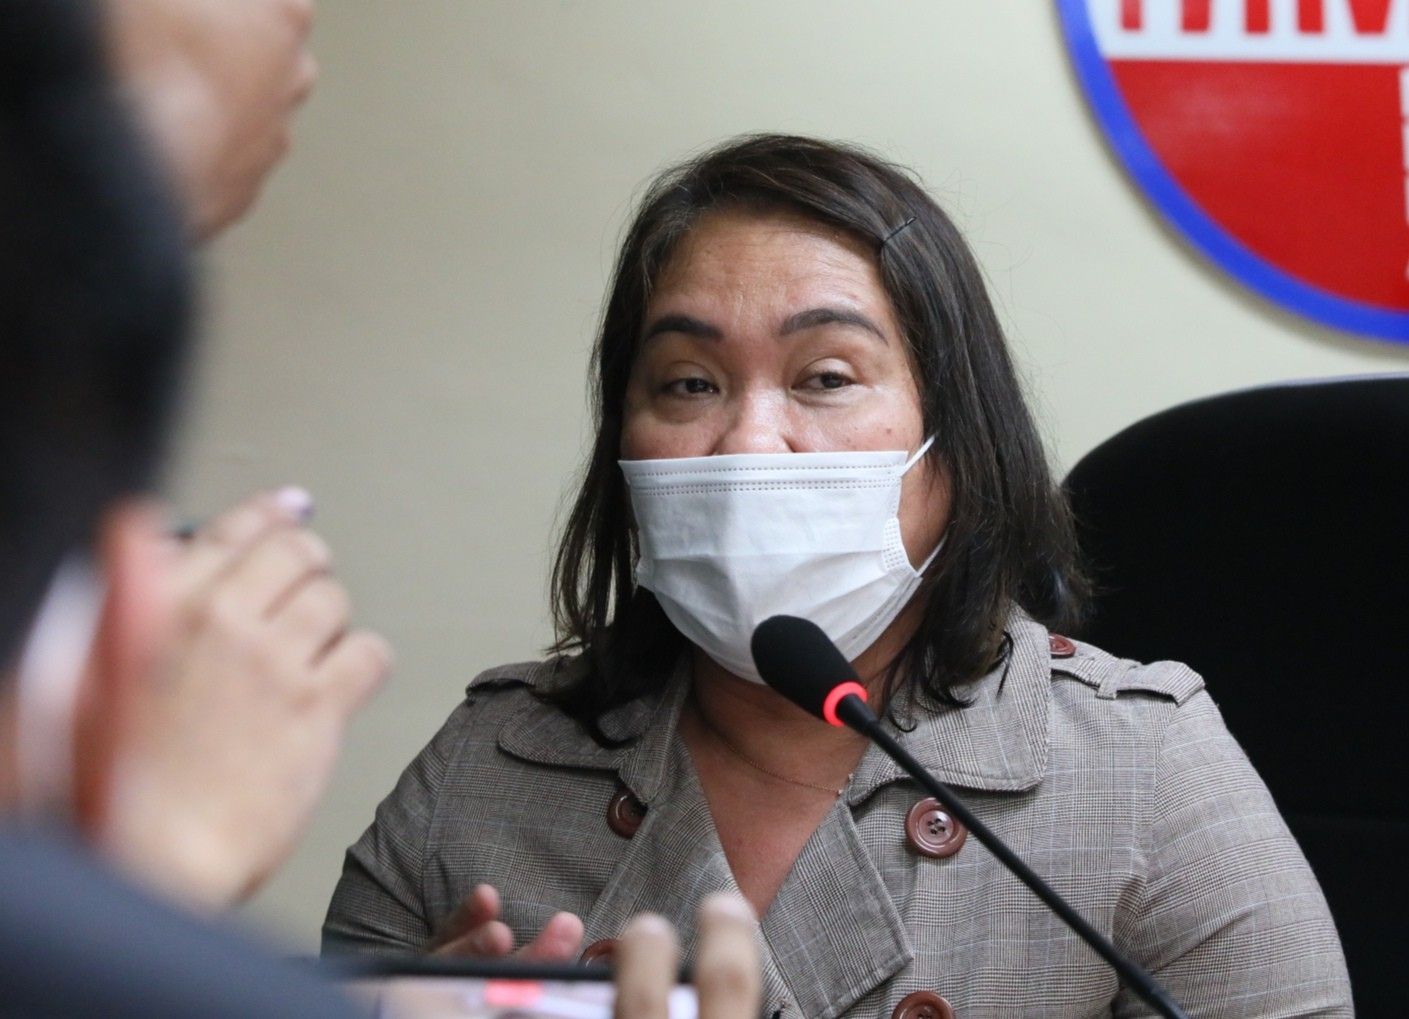 LTFRB chairperson steps down to become OIC press secretary